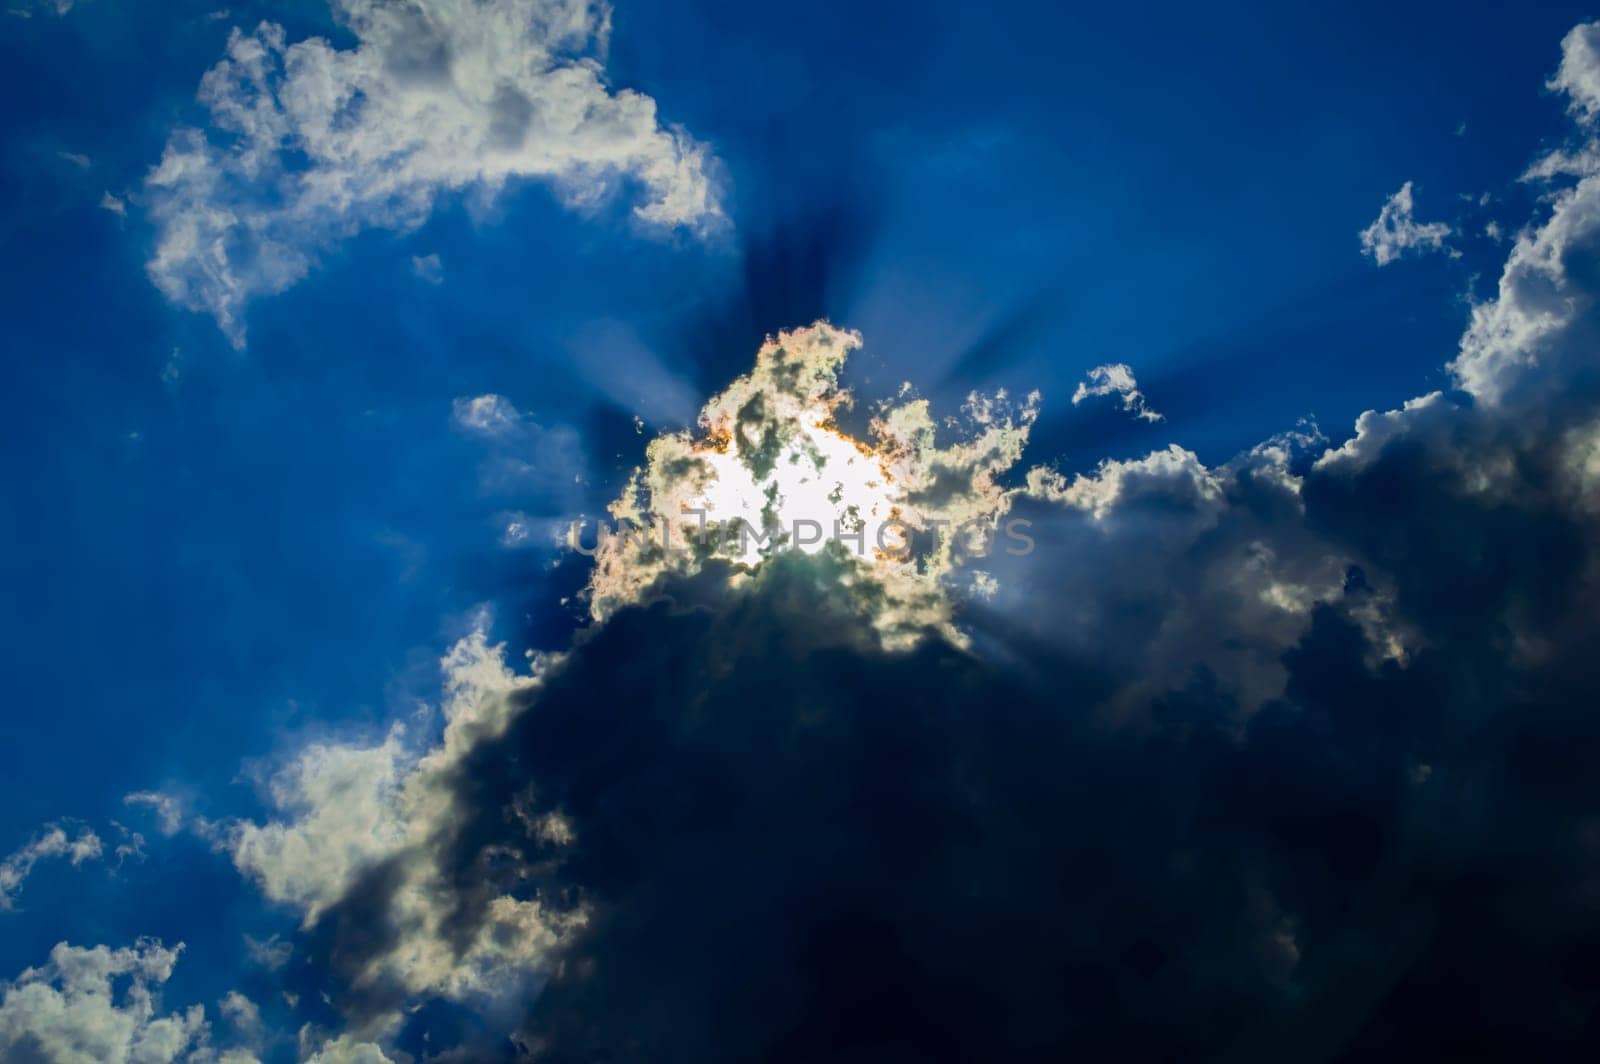 The sun rays break through a thundercloud on a blue sky. Sunbeam in heaven. Thunderclouds. Blue sky. Weather forecast. Climatic conditions. background image. Beautiful landscape.